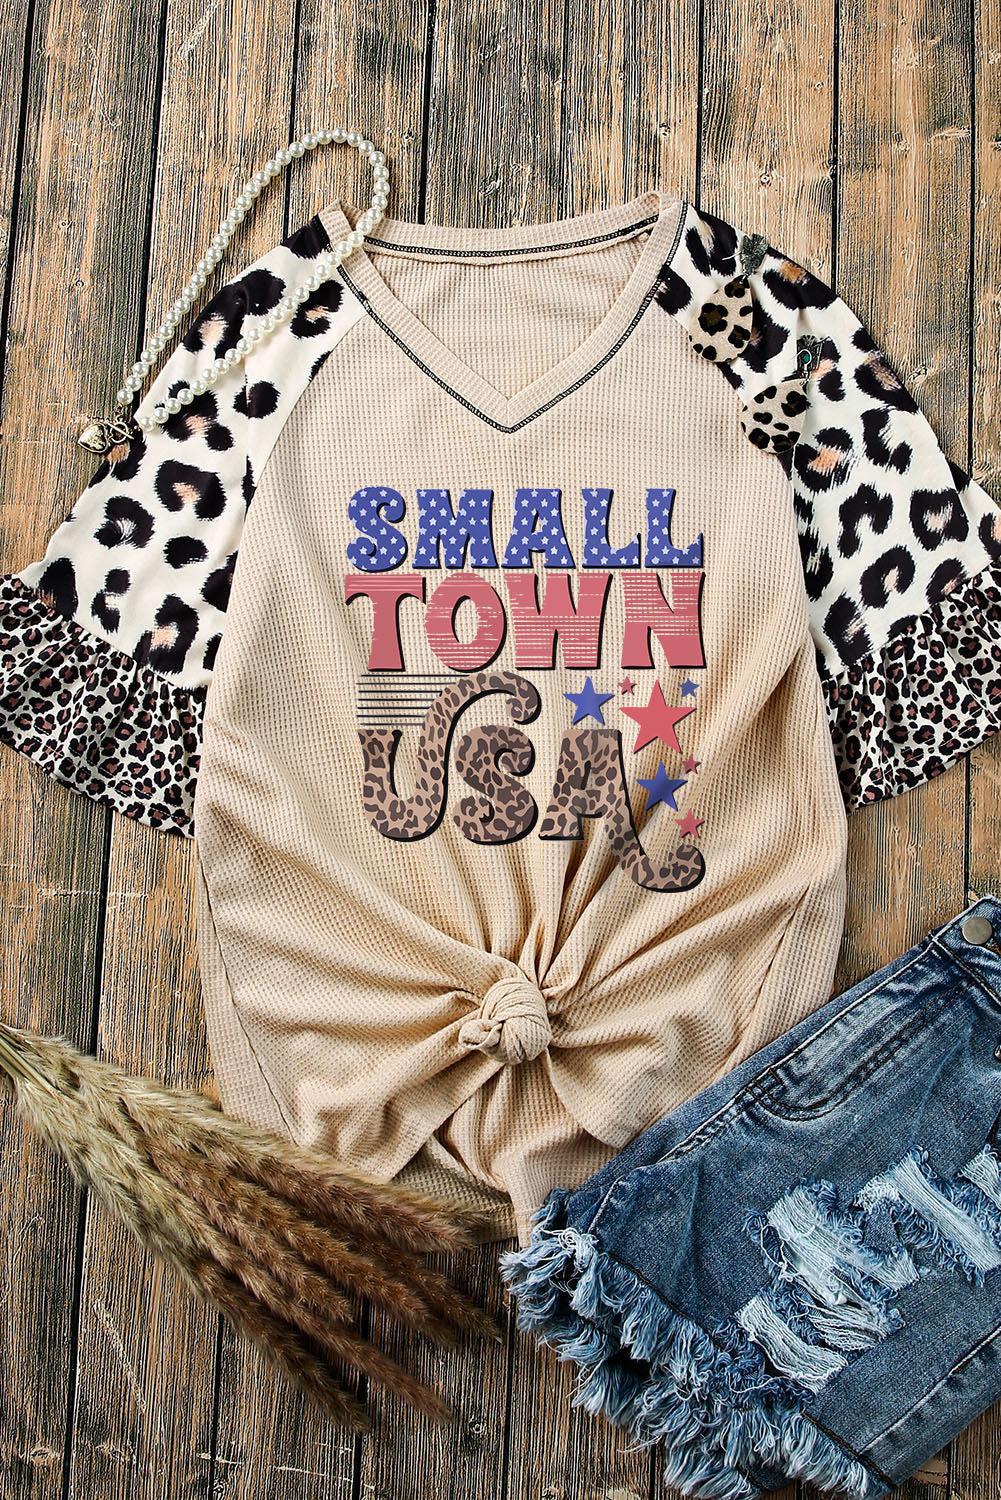 SMALL TOWN USA Graphic Leopard V-Neck Top BLUE ZONE PLANET